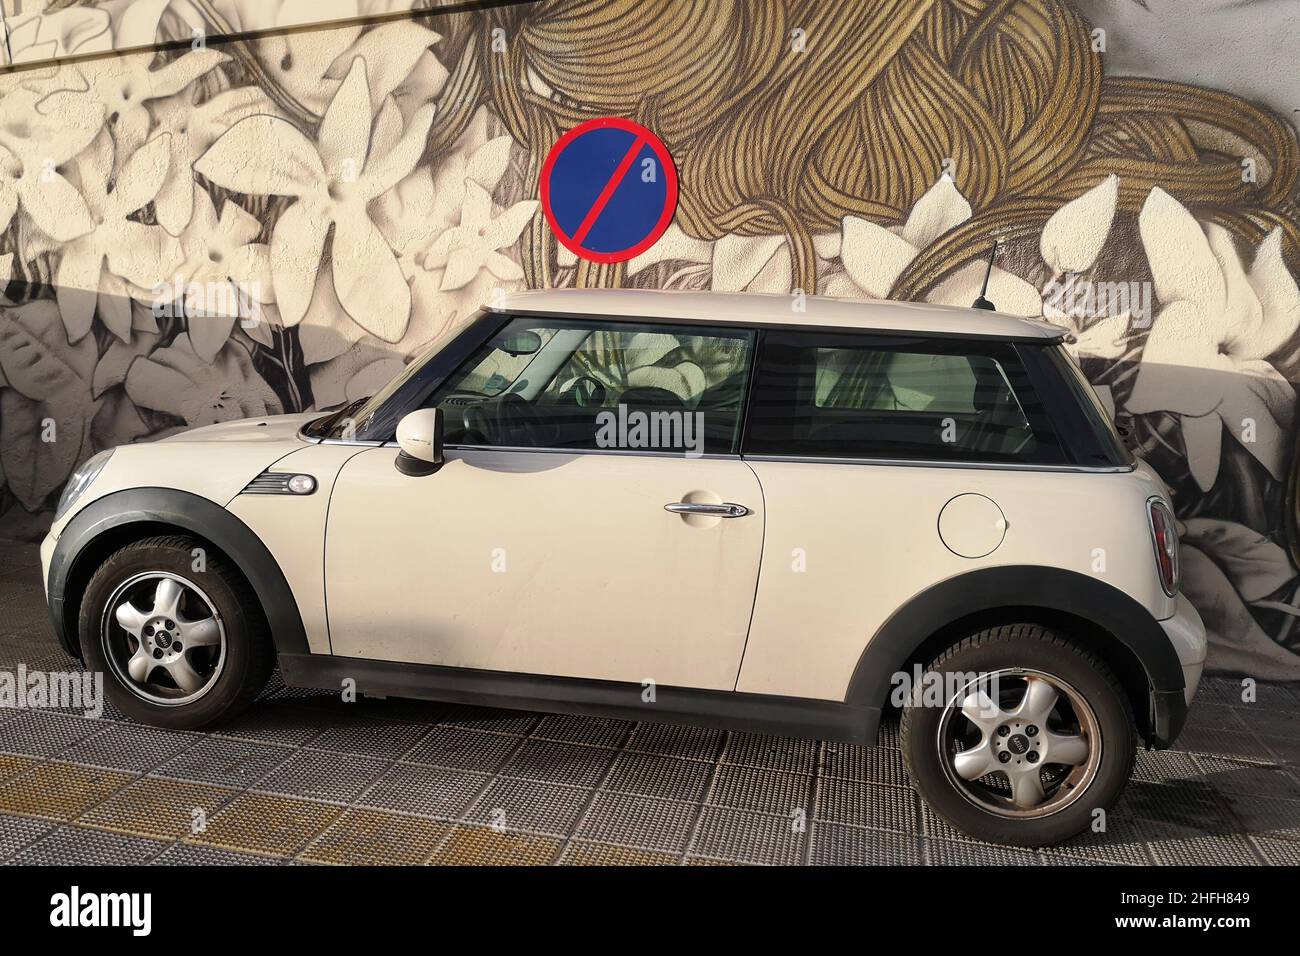 Car parked in front of a 'No Parking' sing in Malaga, Spain. Stock Photo